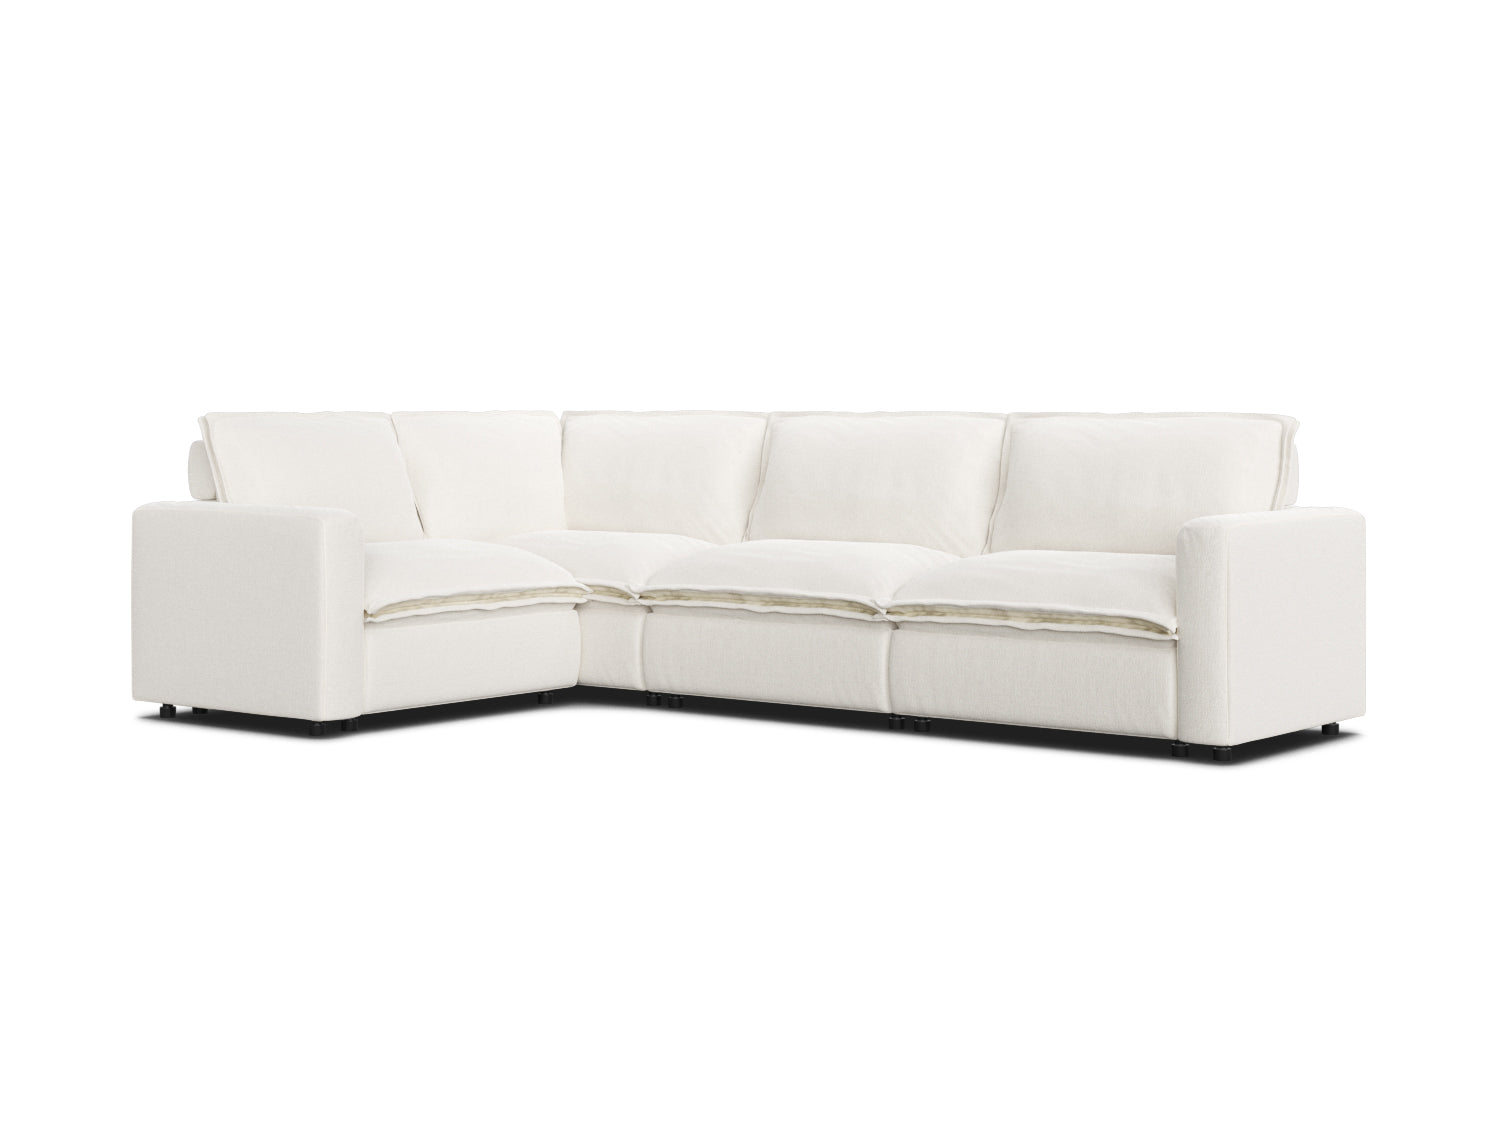 White l-shaped sectional couch in linen